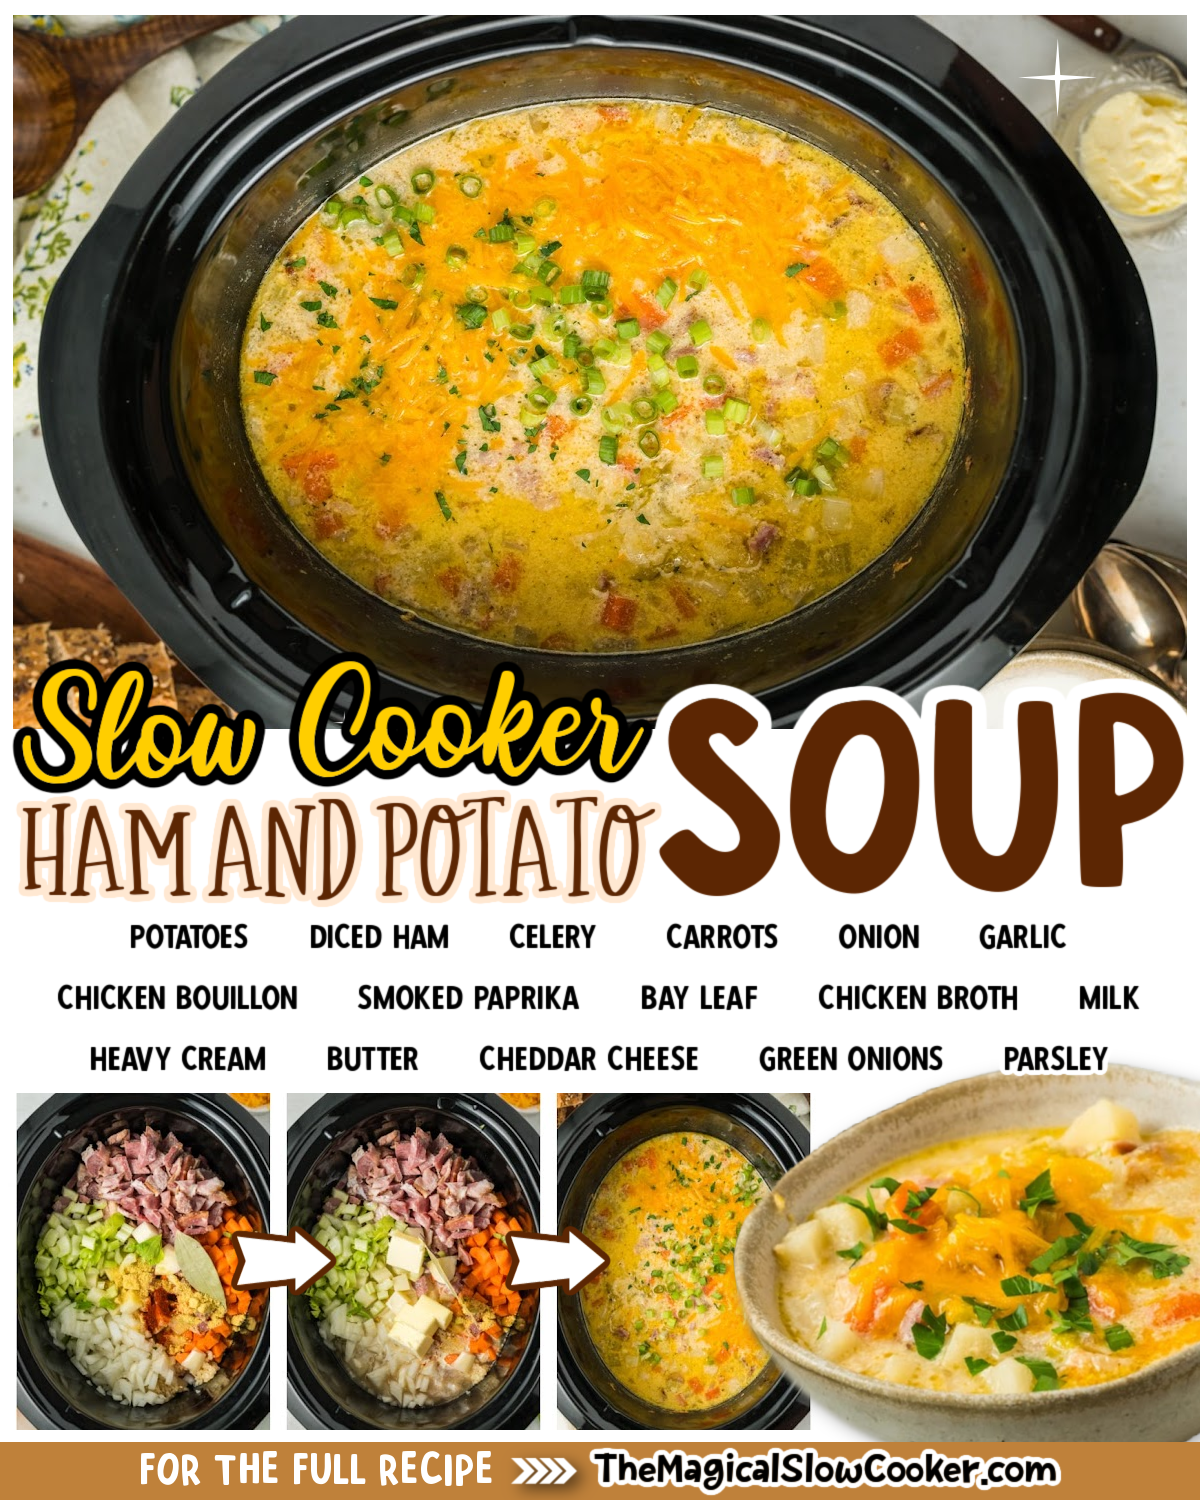 ham and potato soup photos with text of what the ingredients are for facebook.